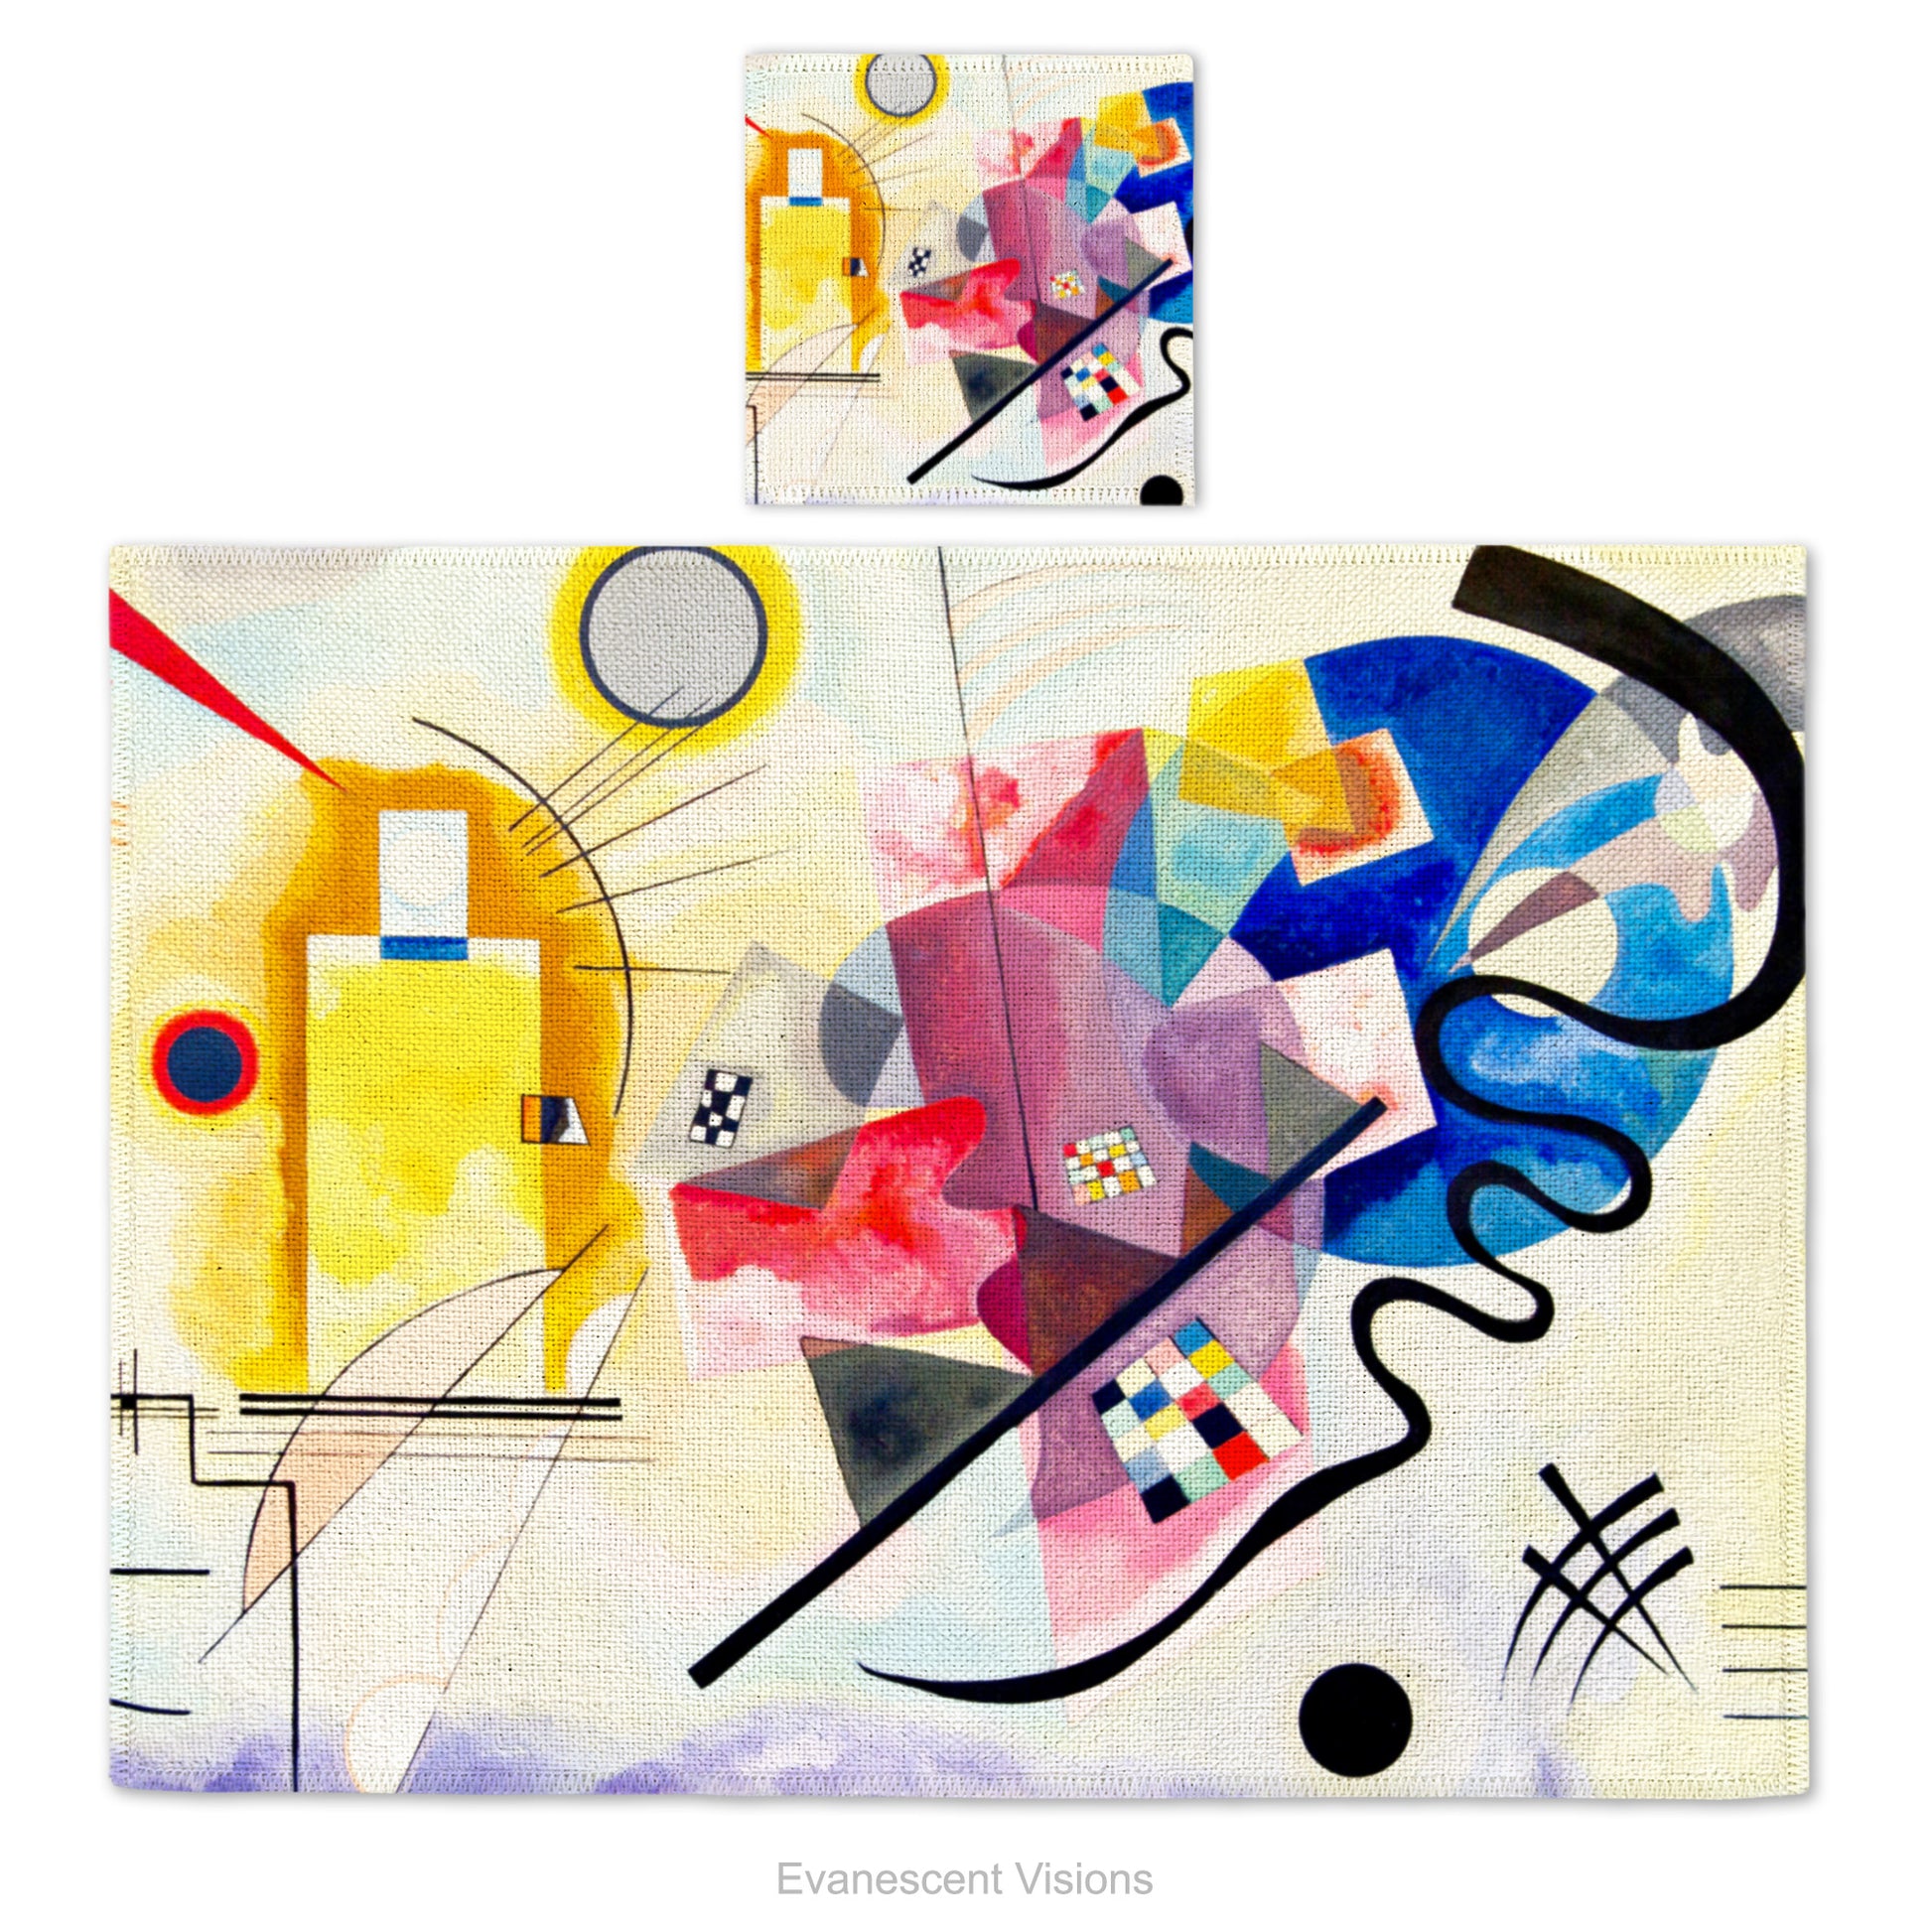 Placemat and coaster with the artwork 'Jaune, Rouge, Bleu' by artist Wassily Kandinsky (1866-1944)